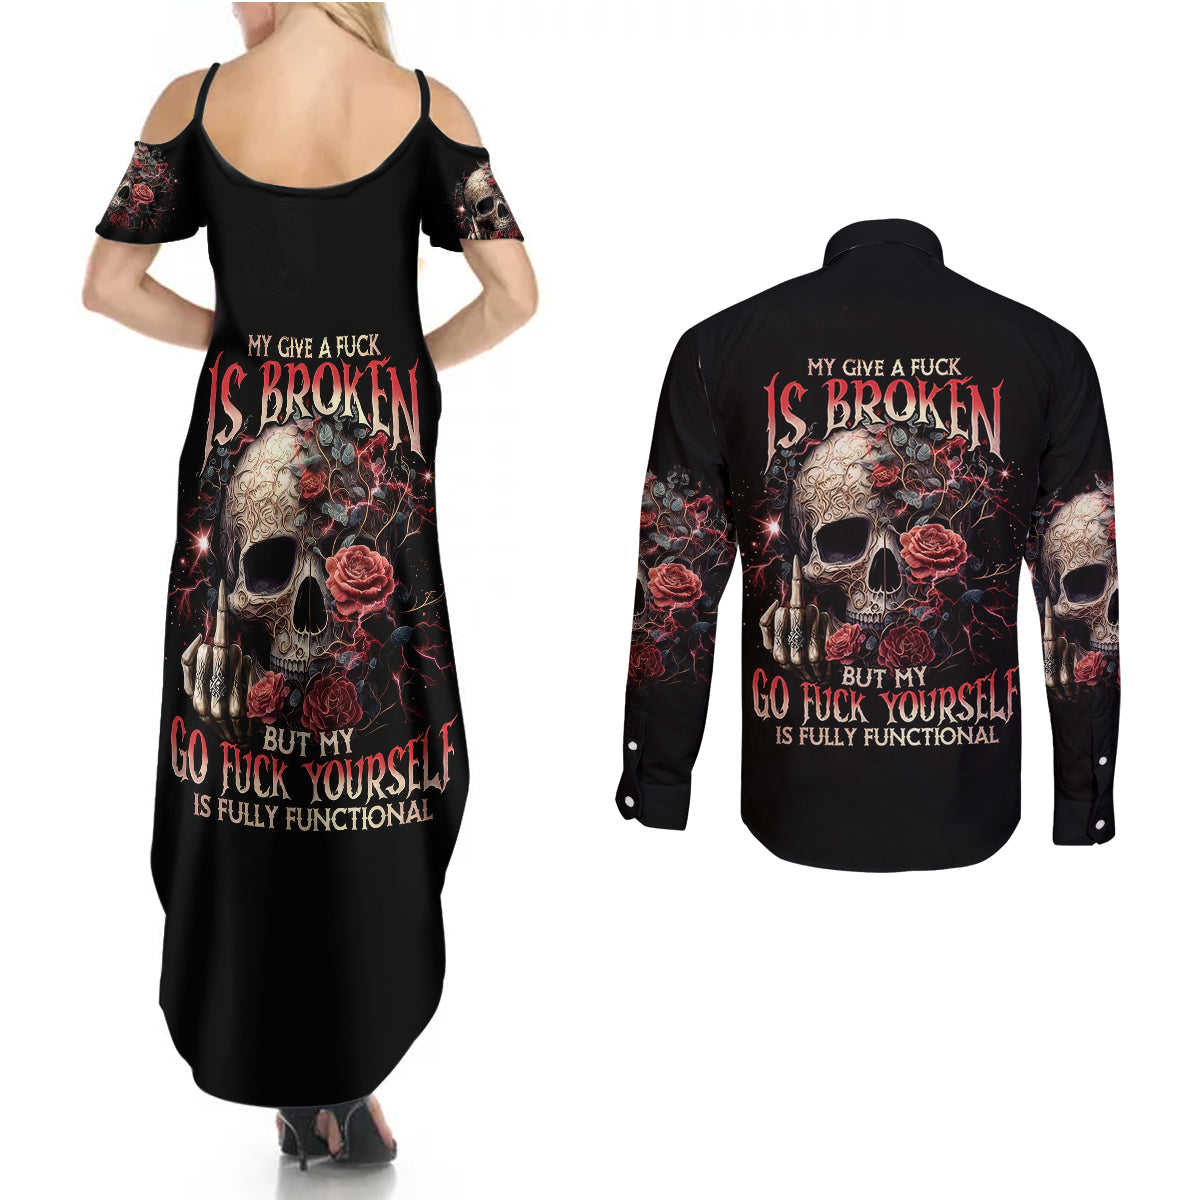 rose-skull-couples-matching-summer-maxi-dress-and-long-sleeve-button-shirts-my-give-a-fuck-is-broken-but-my-go-fuck-yourself-is-functional